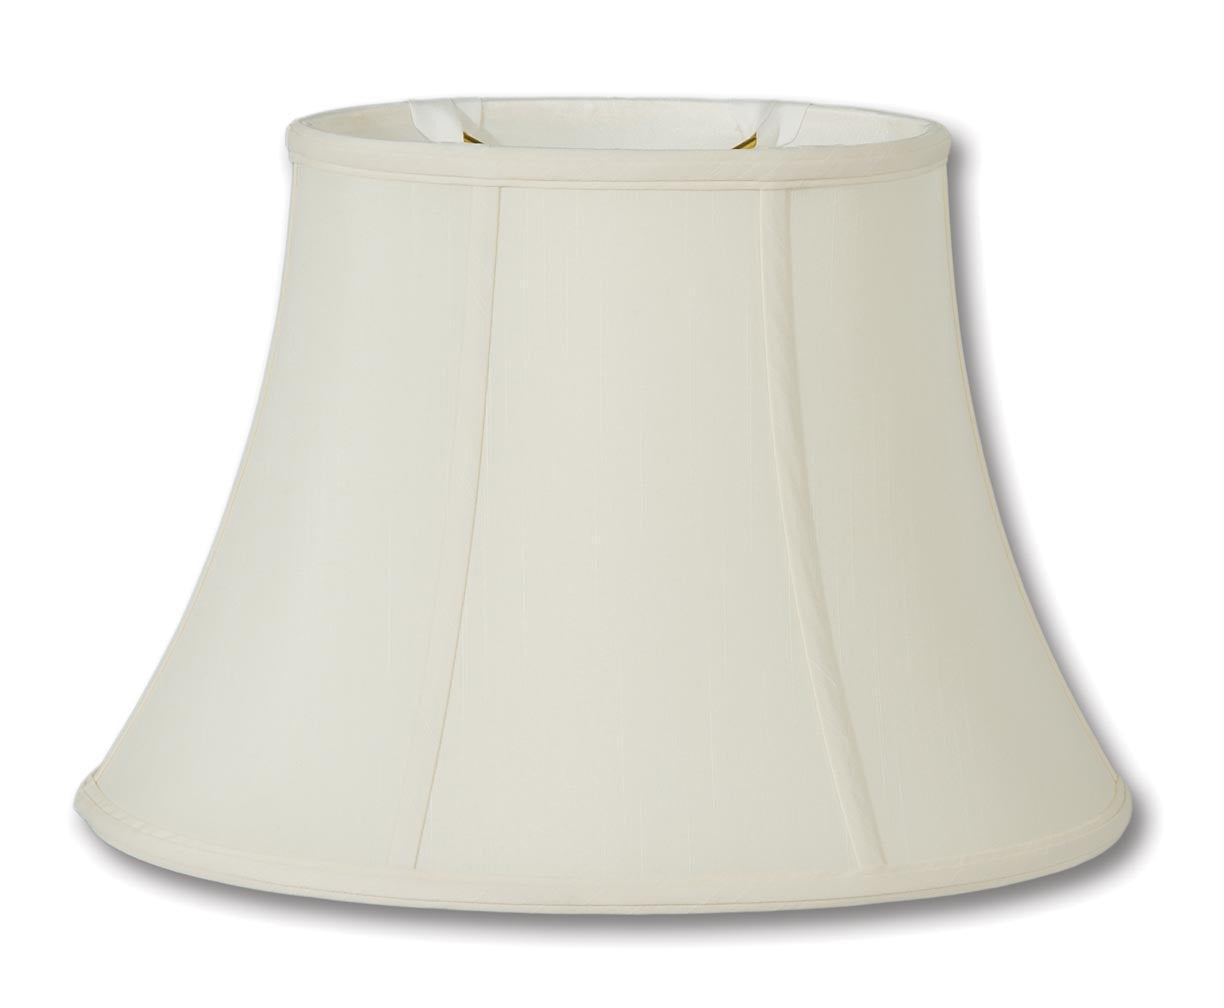 Oval Bell Lamp Shades - Eggshell Color, Tissue Shantung Material